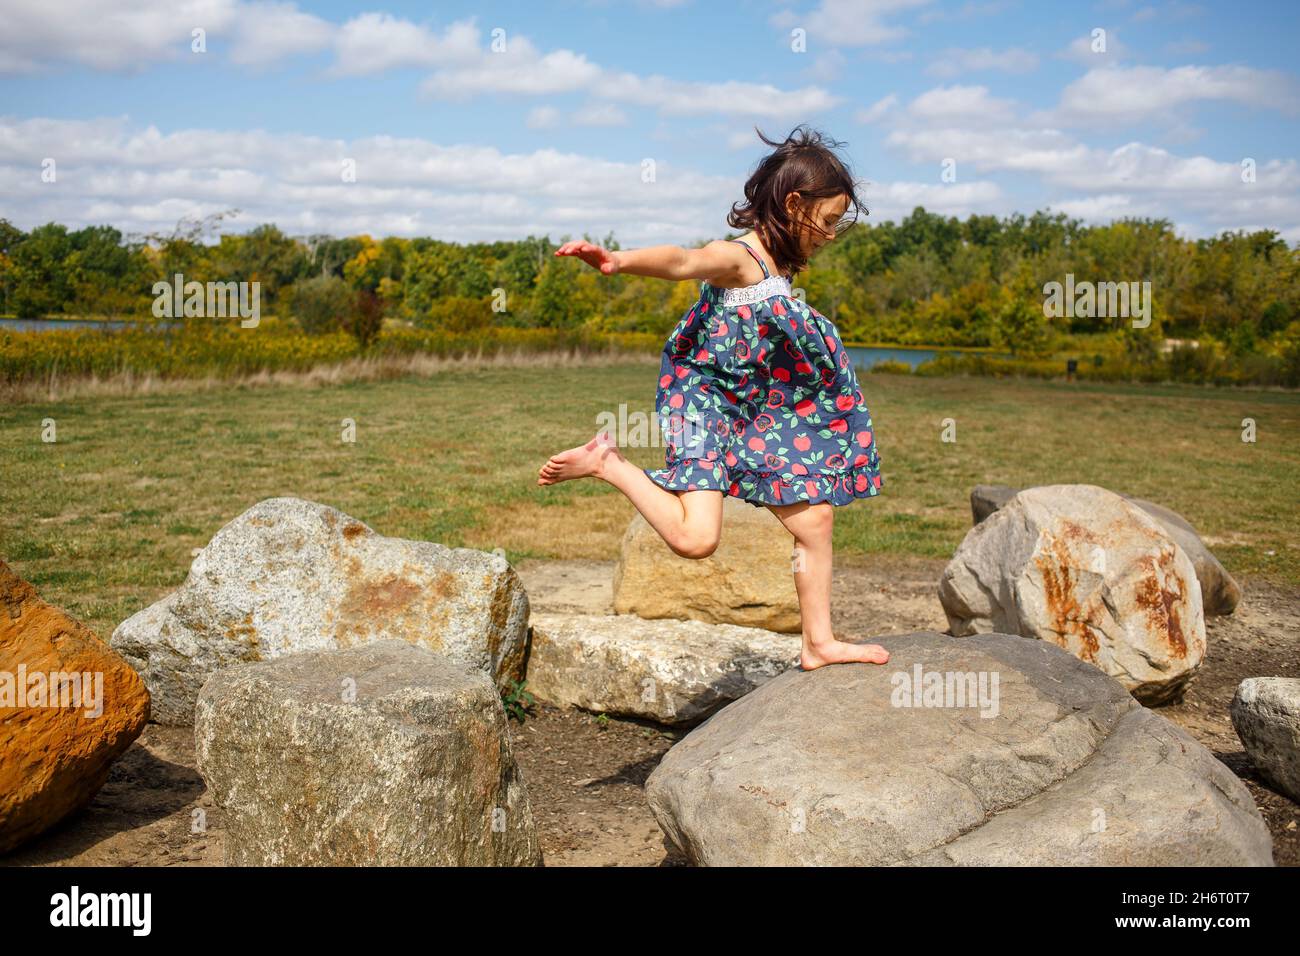 Small barefoot child in sundress leaps between large rocks Stock Photo